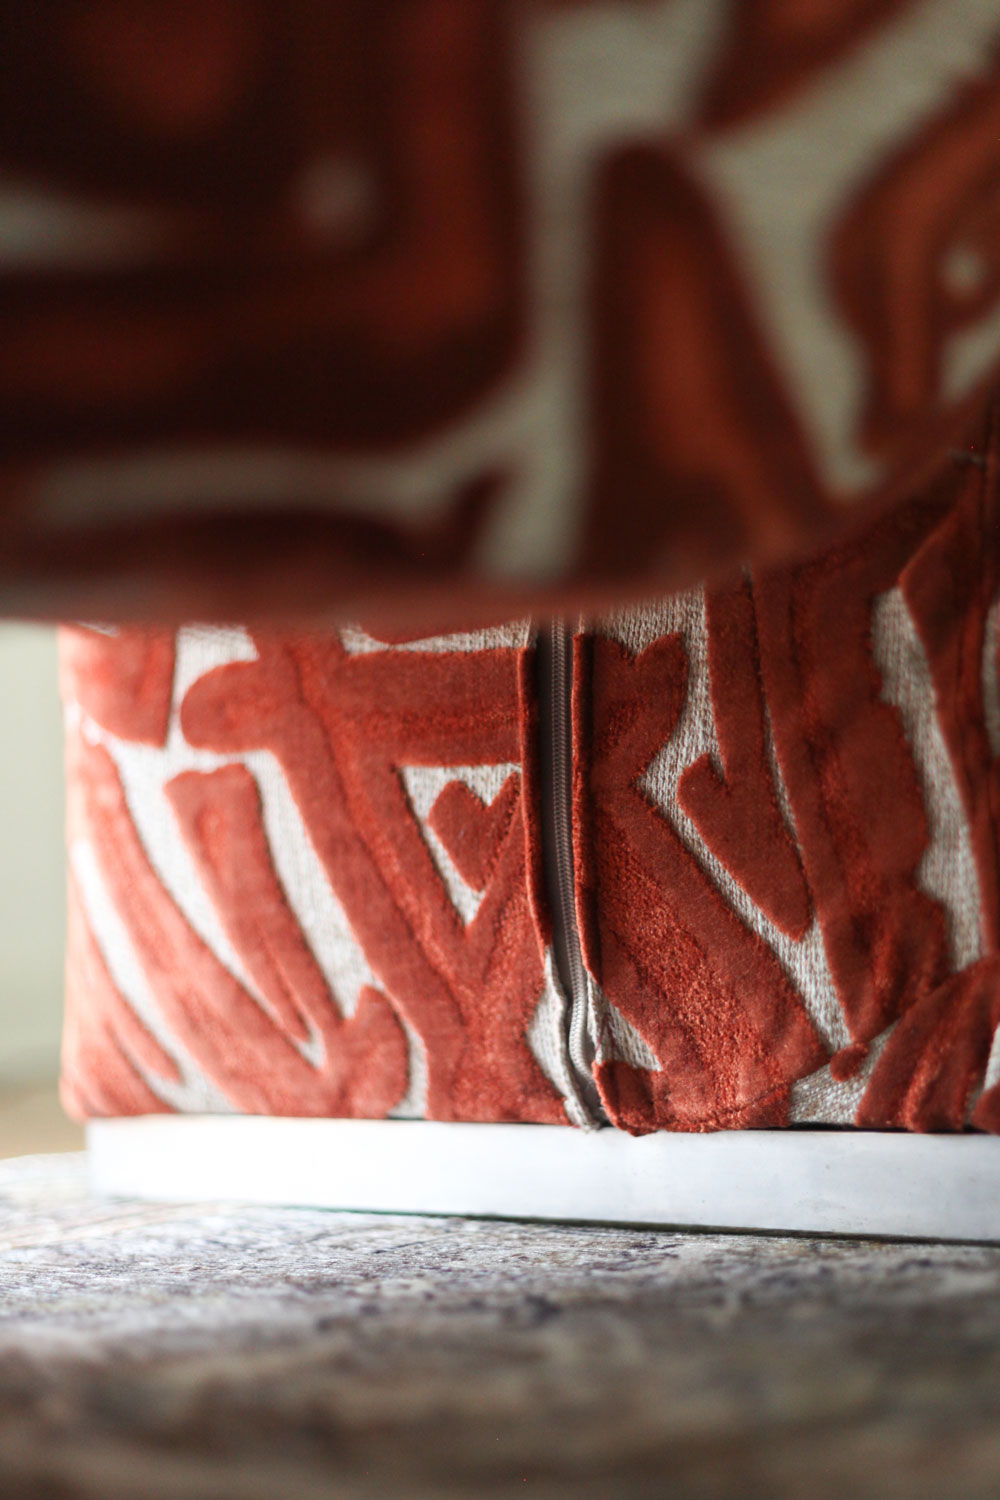 Guide to picking the perfect upholstery fabric